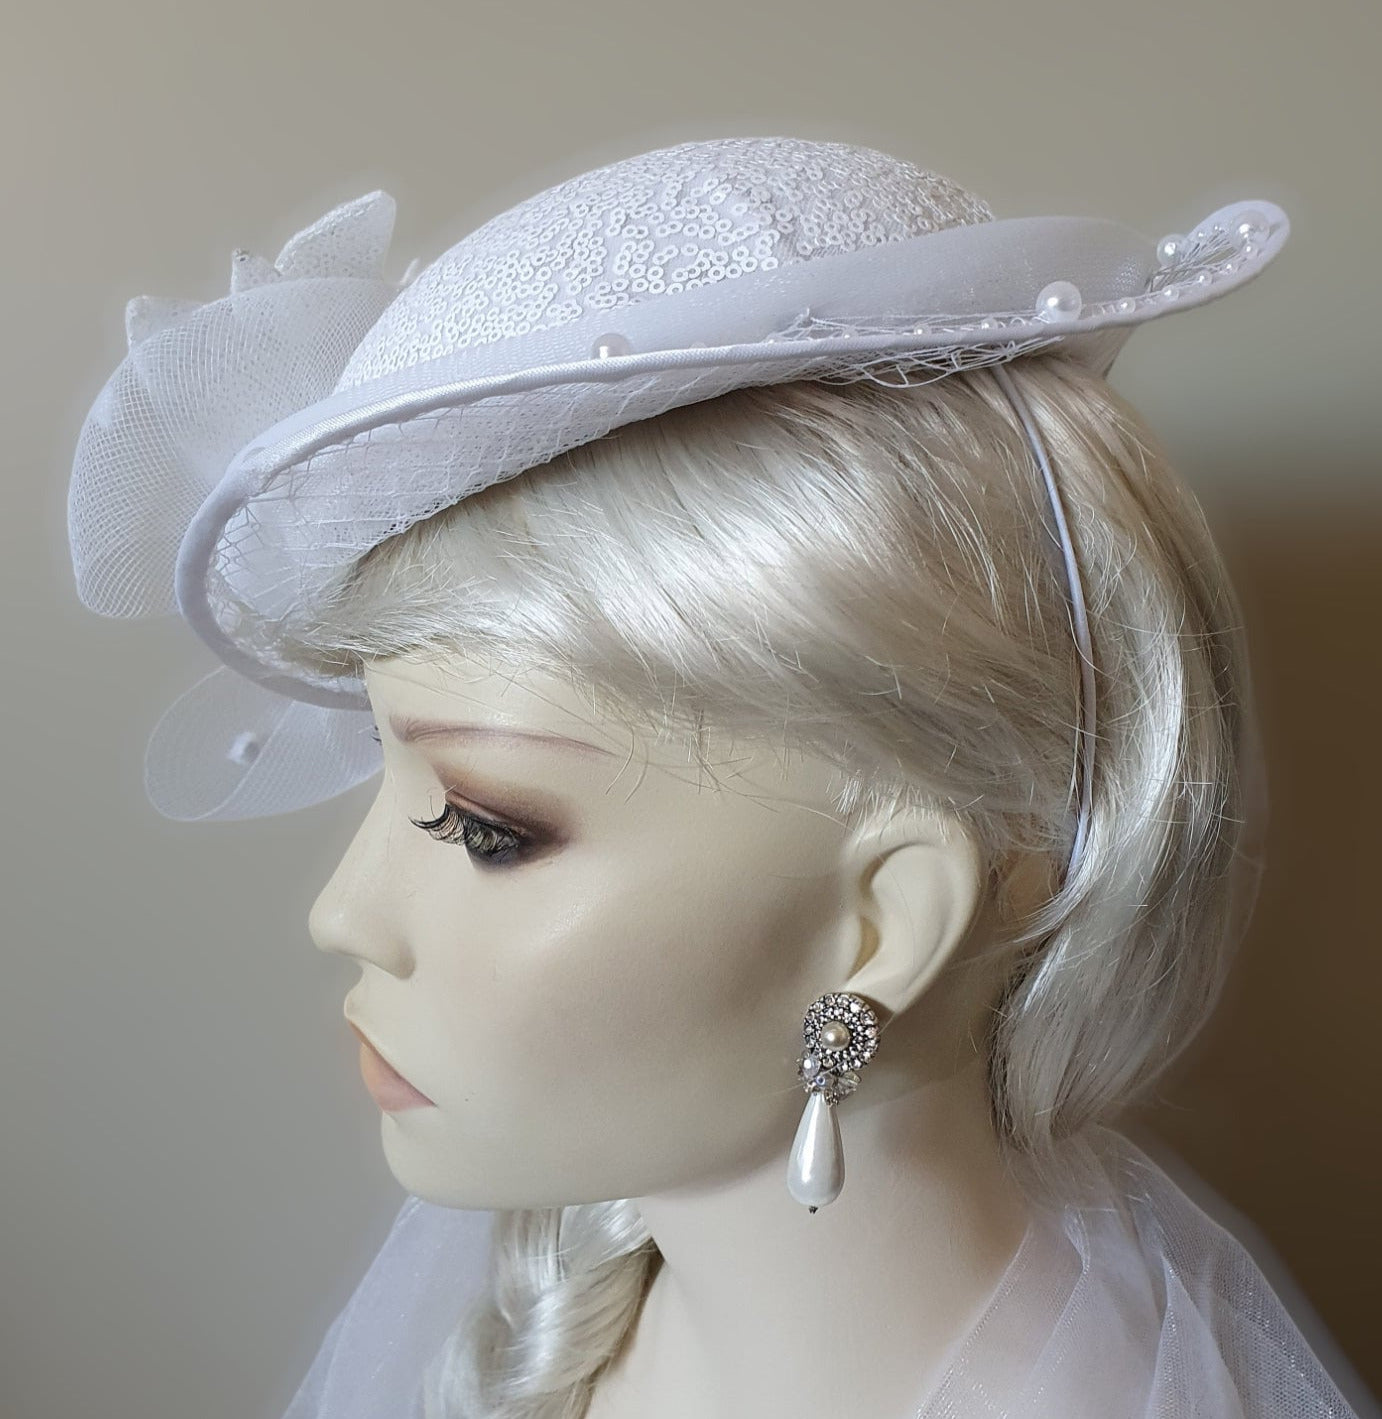 Handmade fascinator made of sequin crinoline material with veil - perfect for weddings and festive occasions